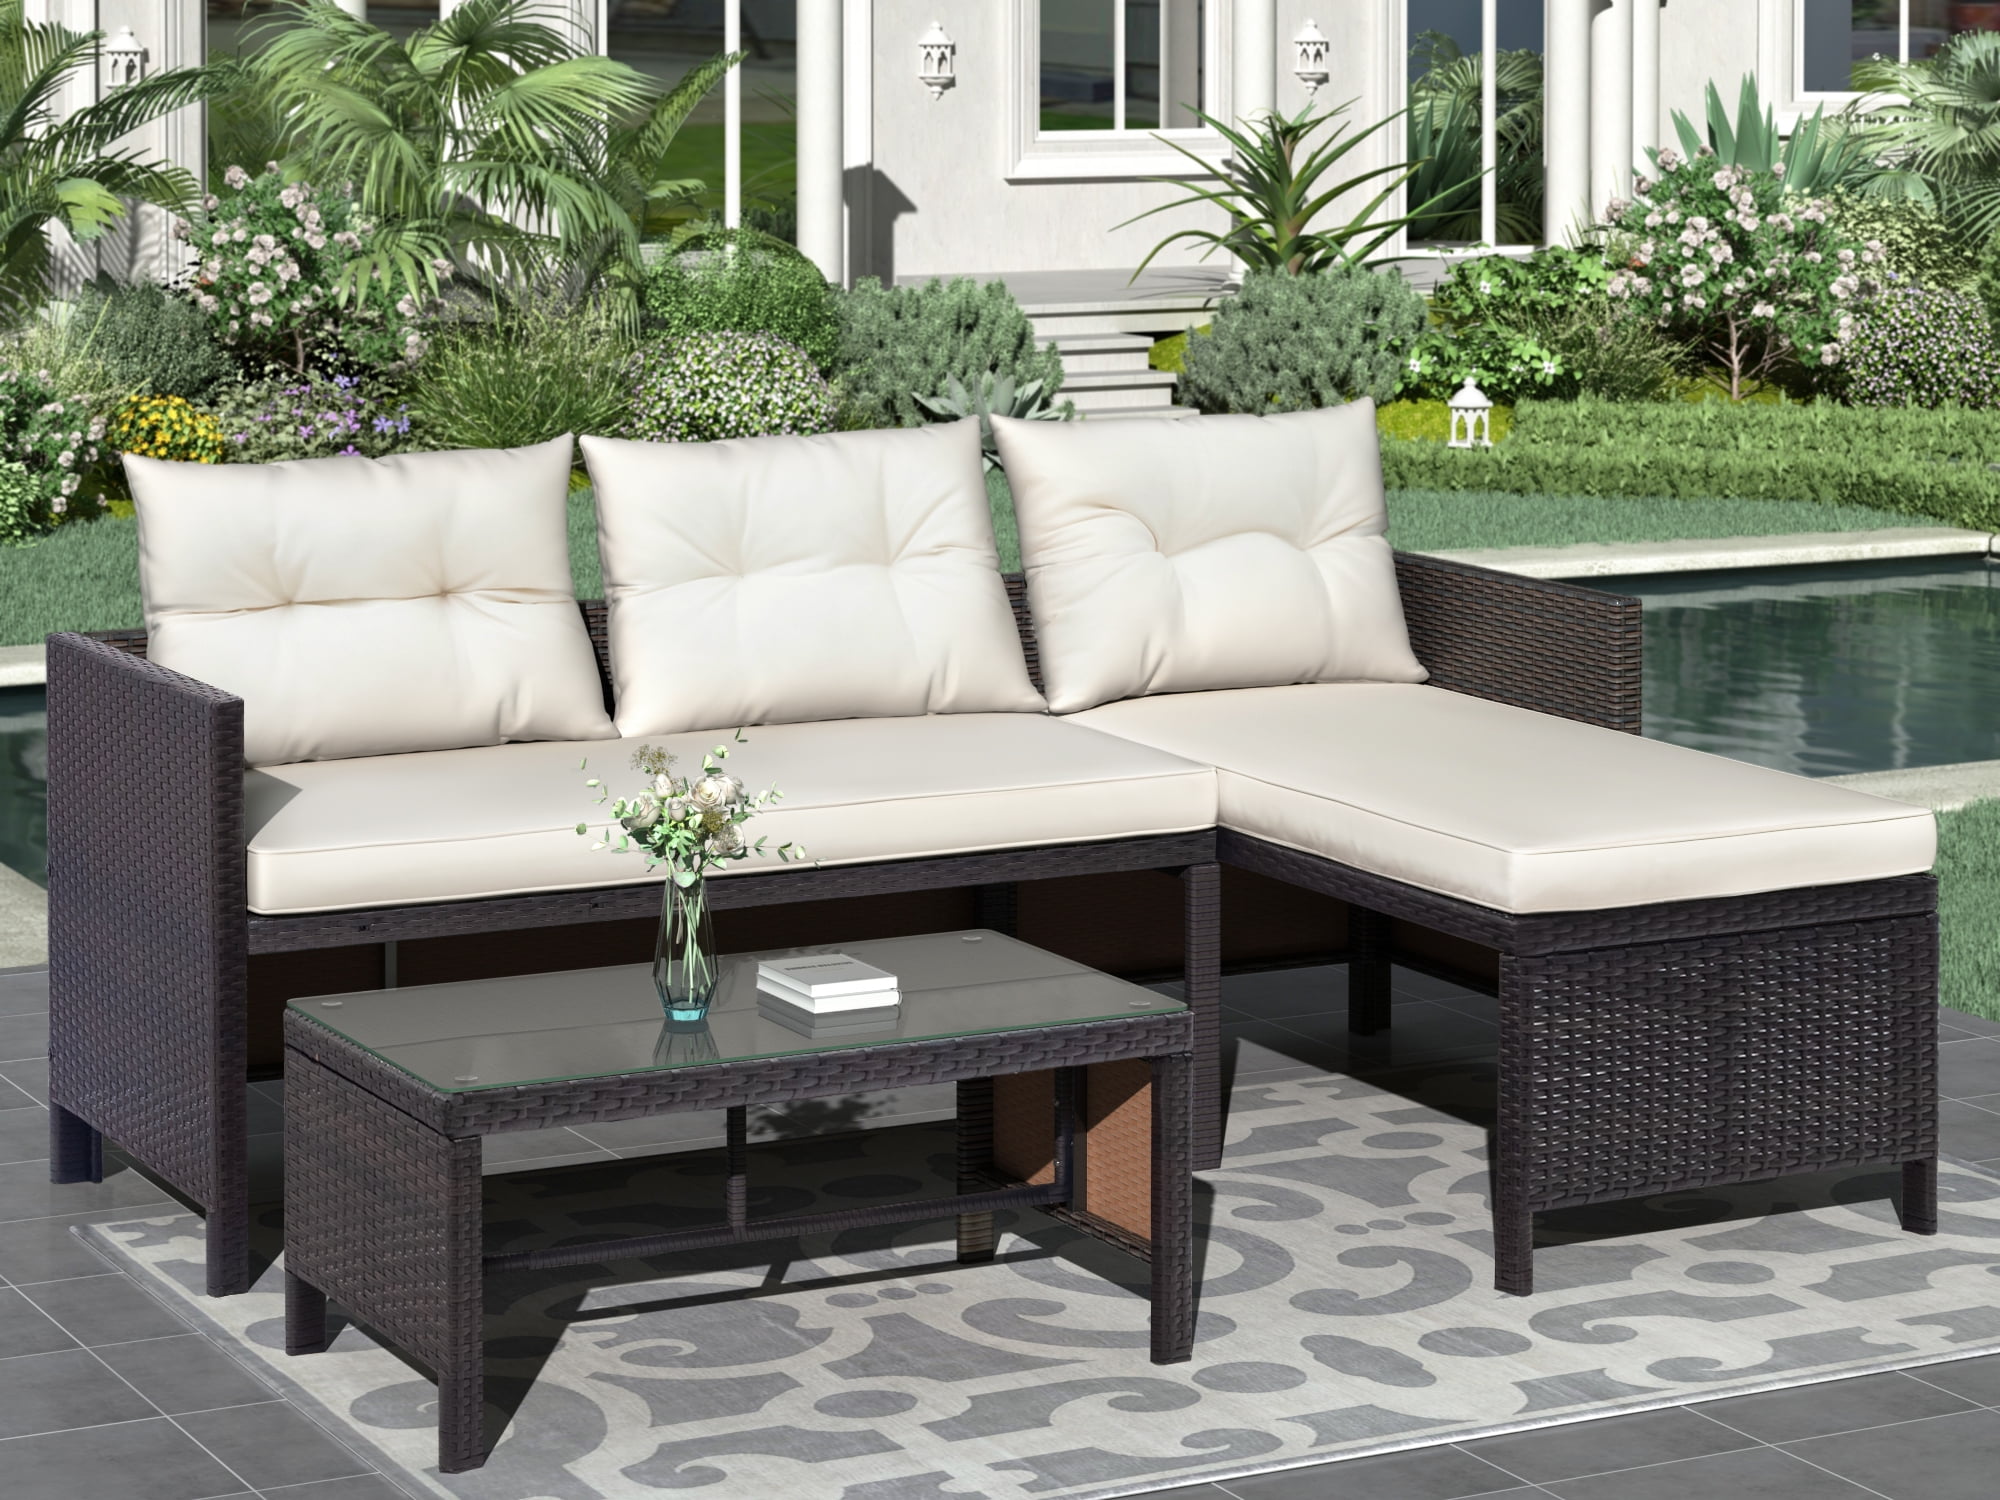 Conversation Sets Patio Furniture Clearance - Clearance! 4 PC Rattan